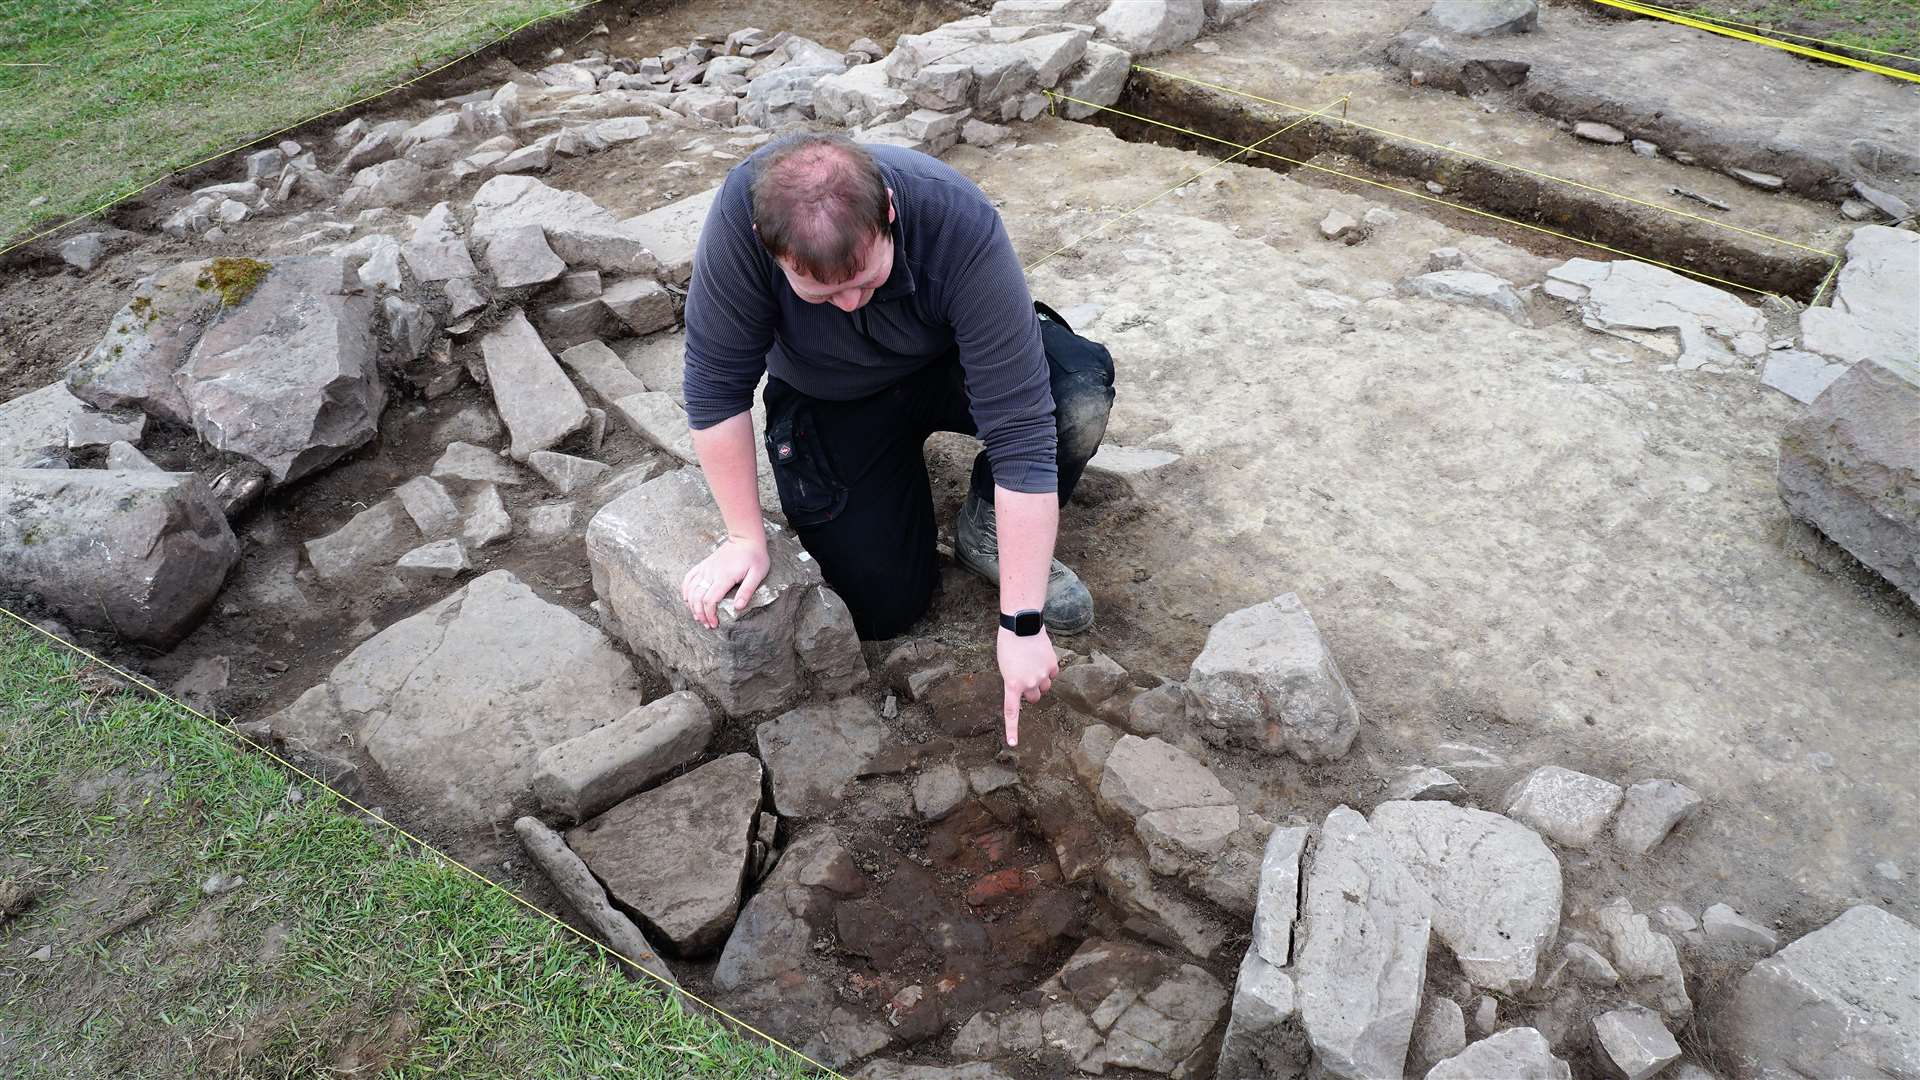 Stuart Munro, a field archaeologist with AOC Archaeology, shows what appears to be the remains of a hearth that was uncovered in the first trench. Samples of burnt material will be taken away for further analysis. Picture: DGS